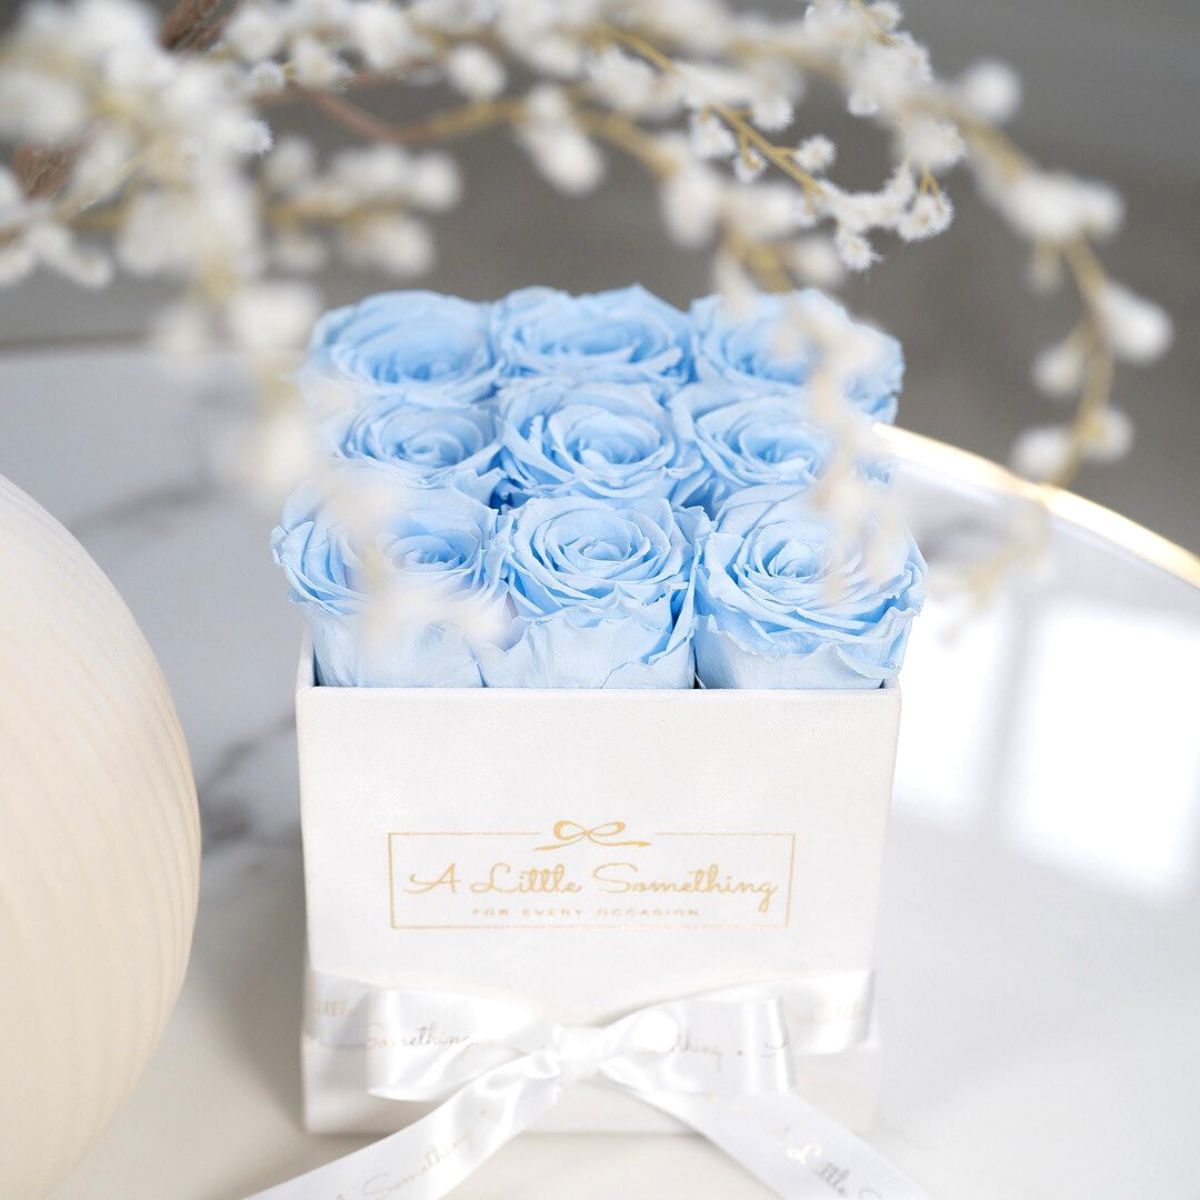 Infinity roses in a box featured